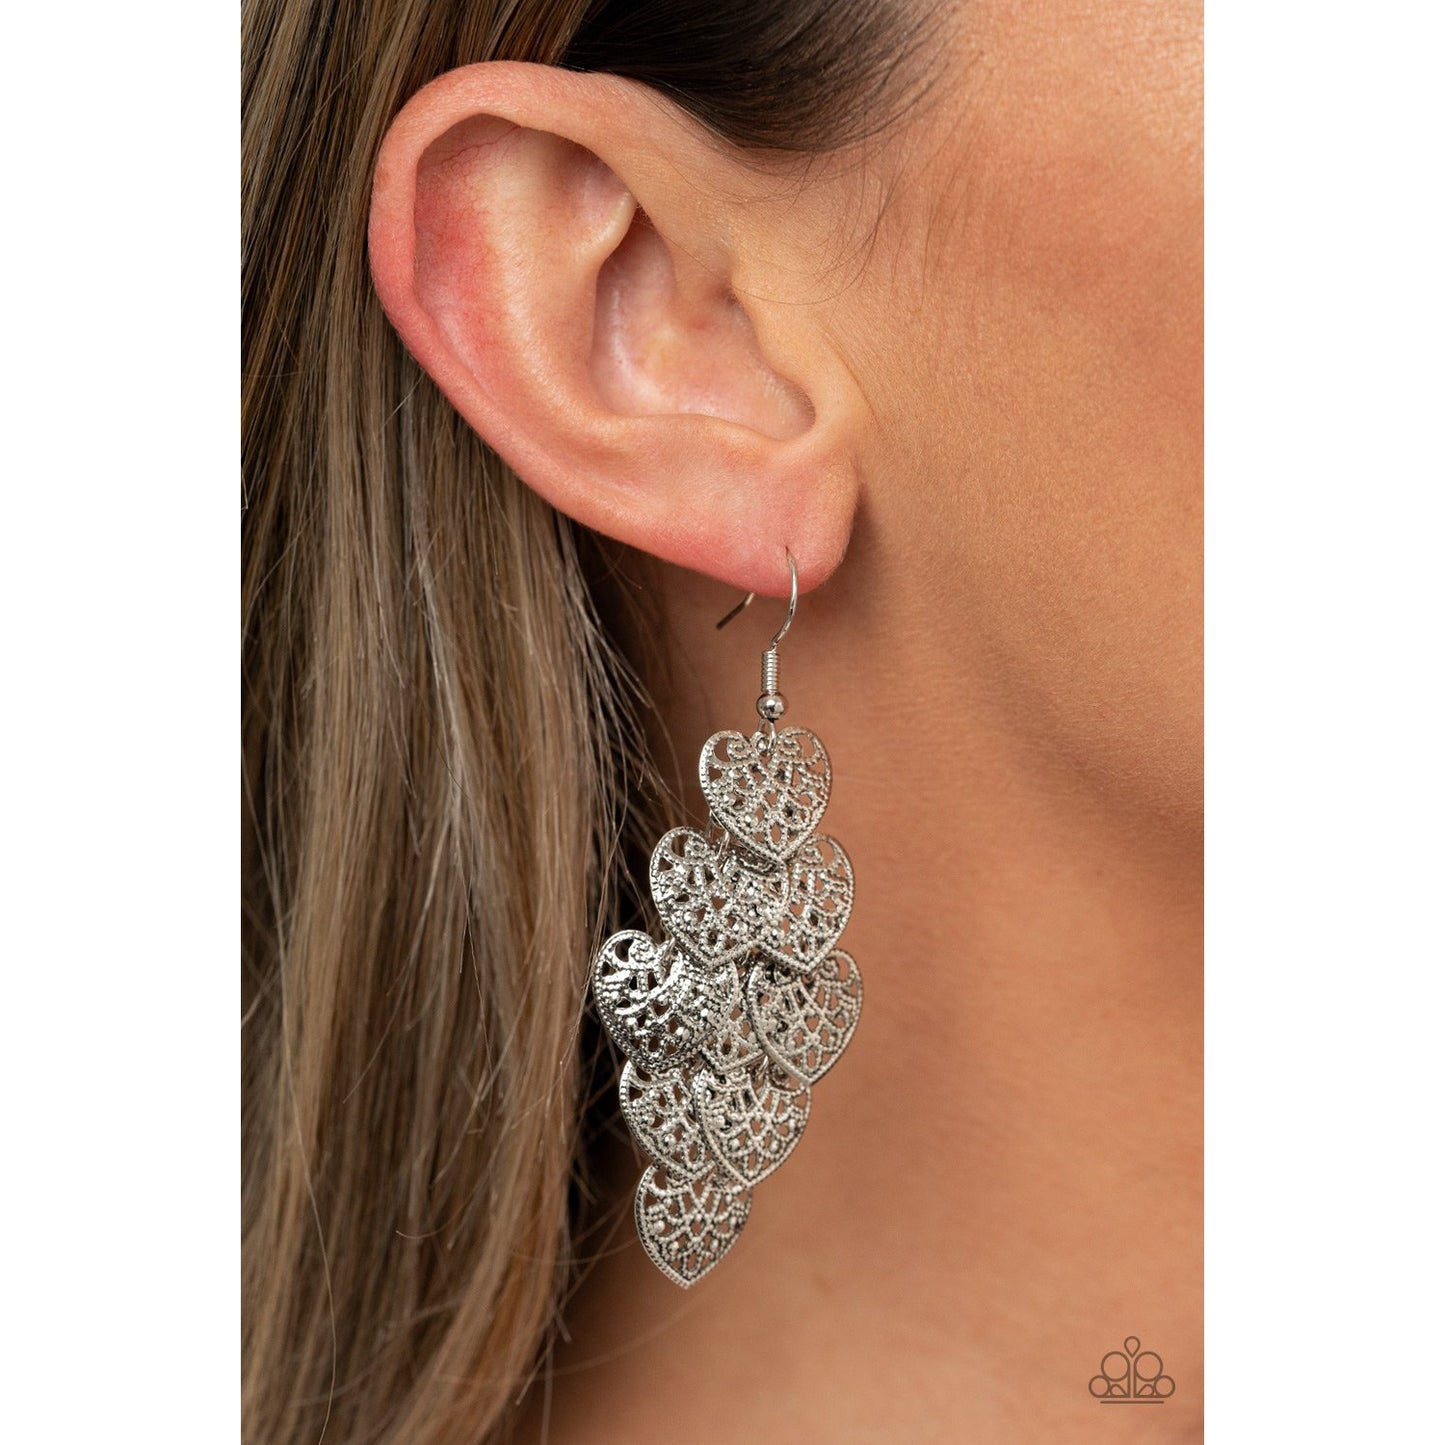 Shimmery Soulmates - Silver Heart Earrings - Paparazzi Accessories - GlaMarous Titi Jewels